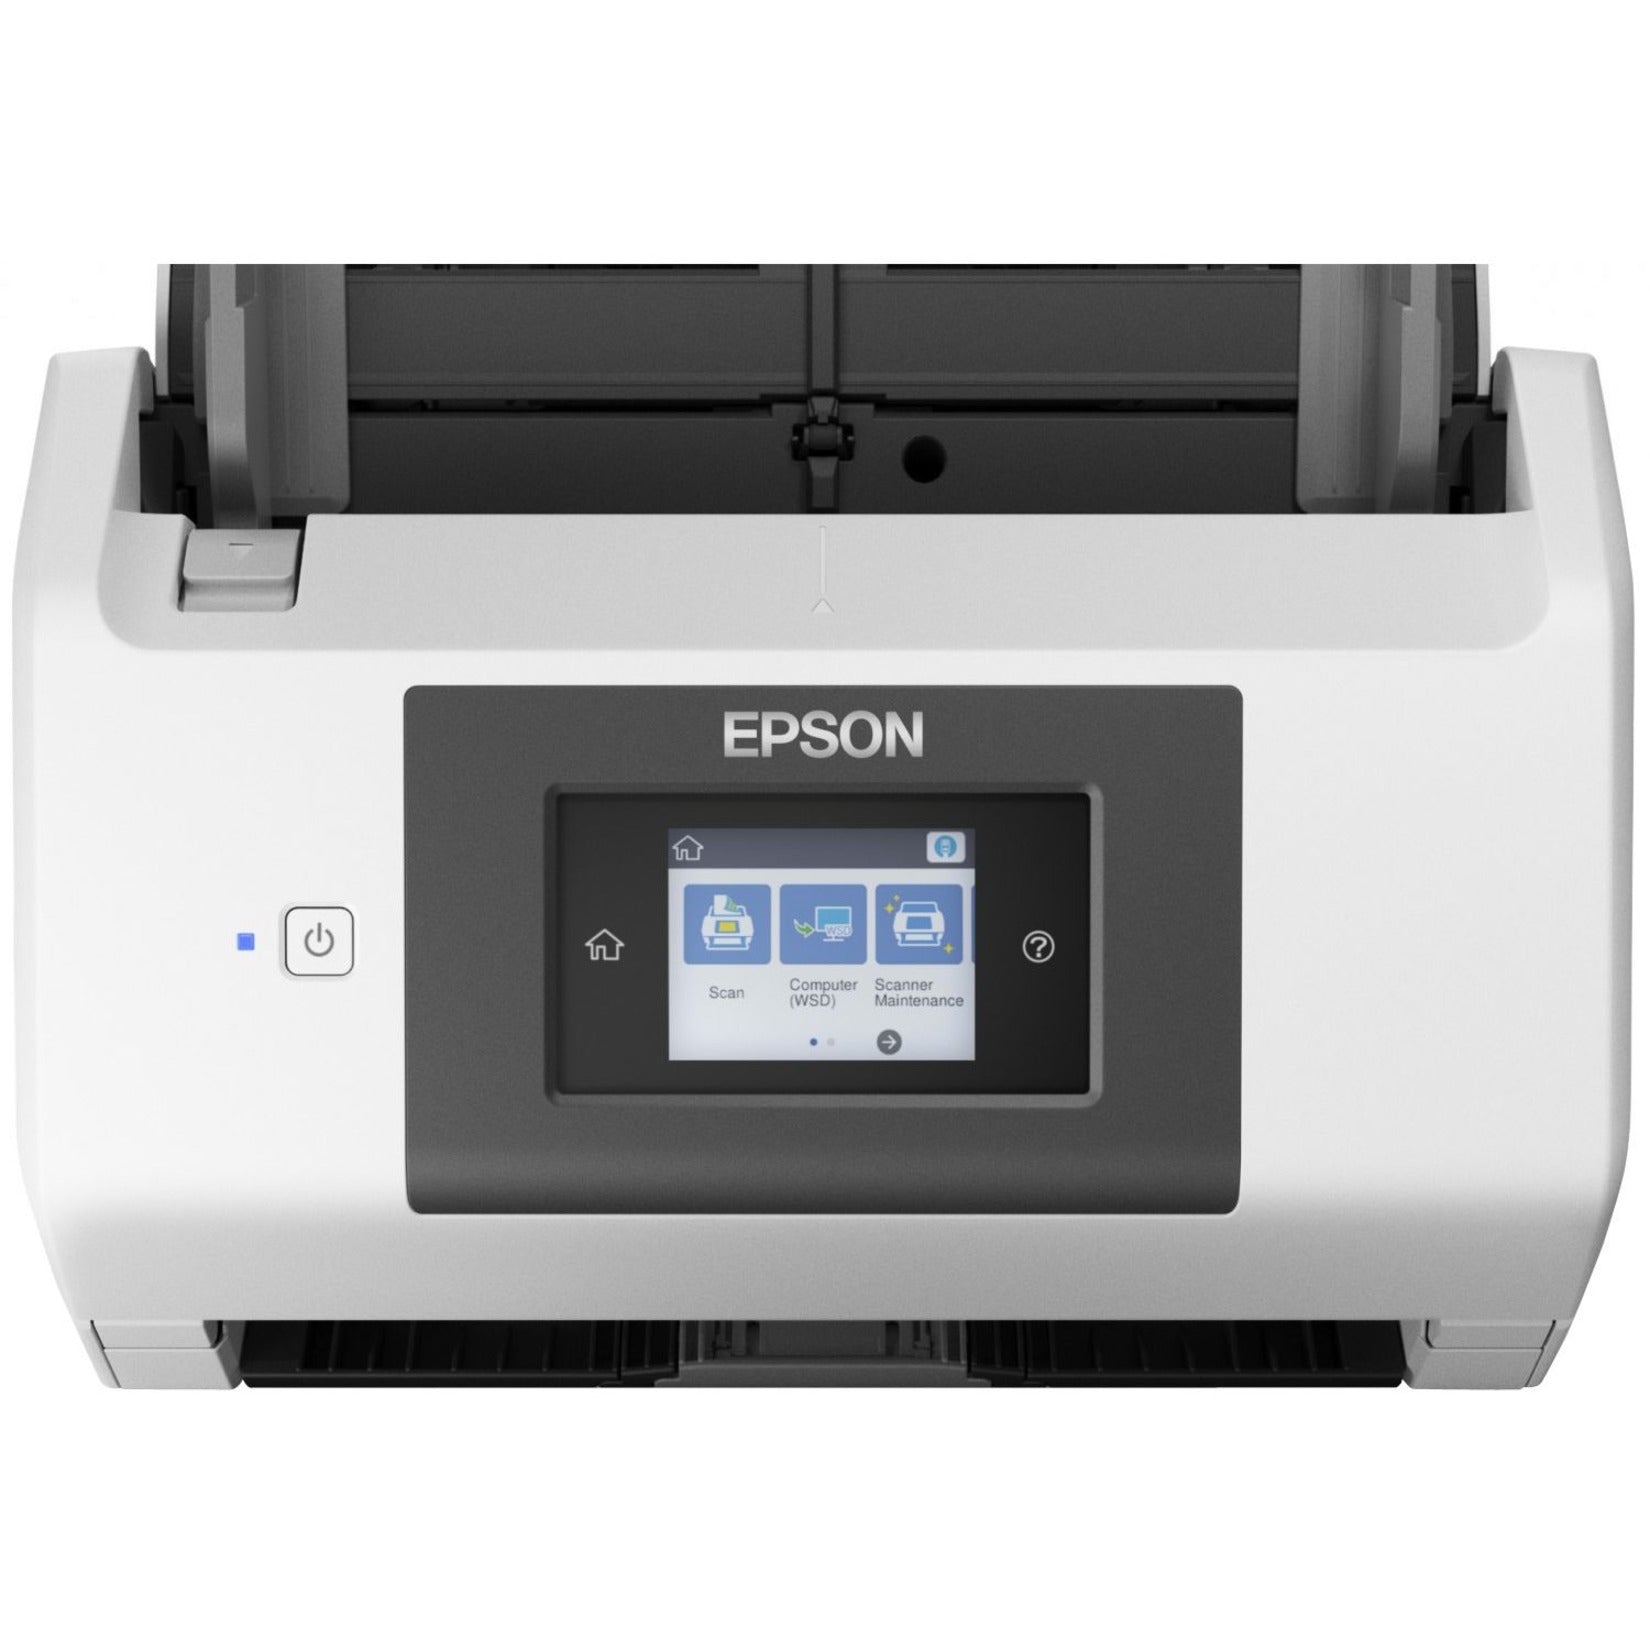 Epson B11B227201 DS-780N Network Color Document Scanner, 600 dpi Optical, Duplex Scanning, 100 Sheets ADF Capacity